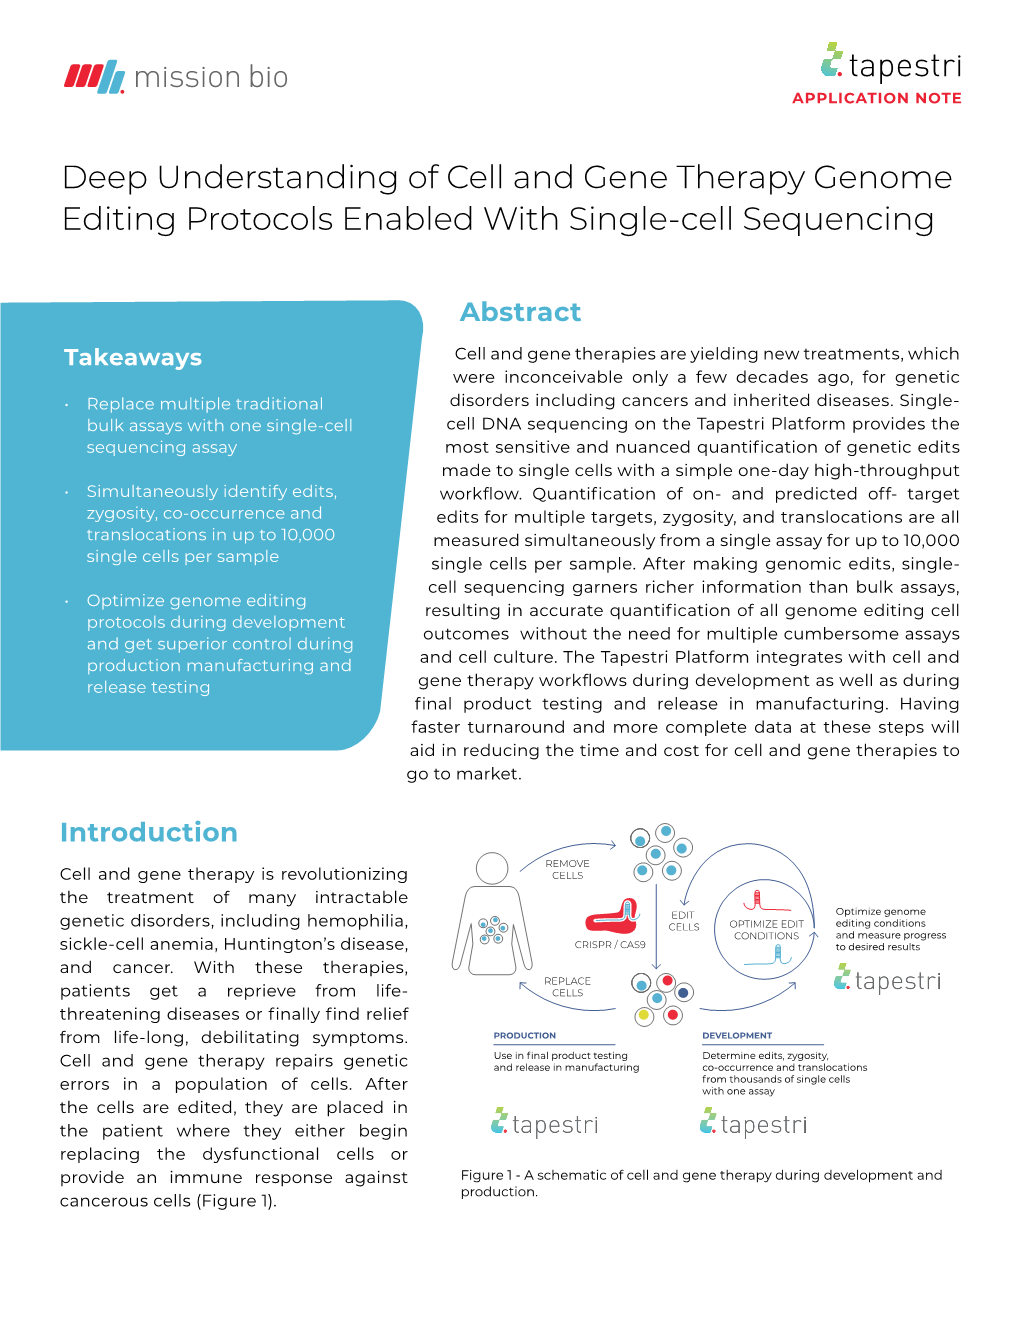 Deep Understanding of Cell and Gene Therapy Genome Editing Protocols Enabled with Single-Cell Sequencing